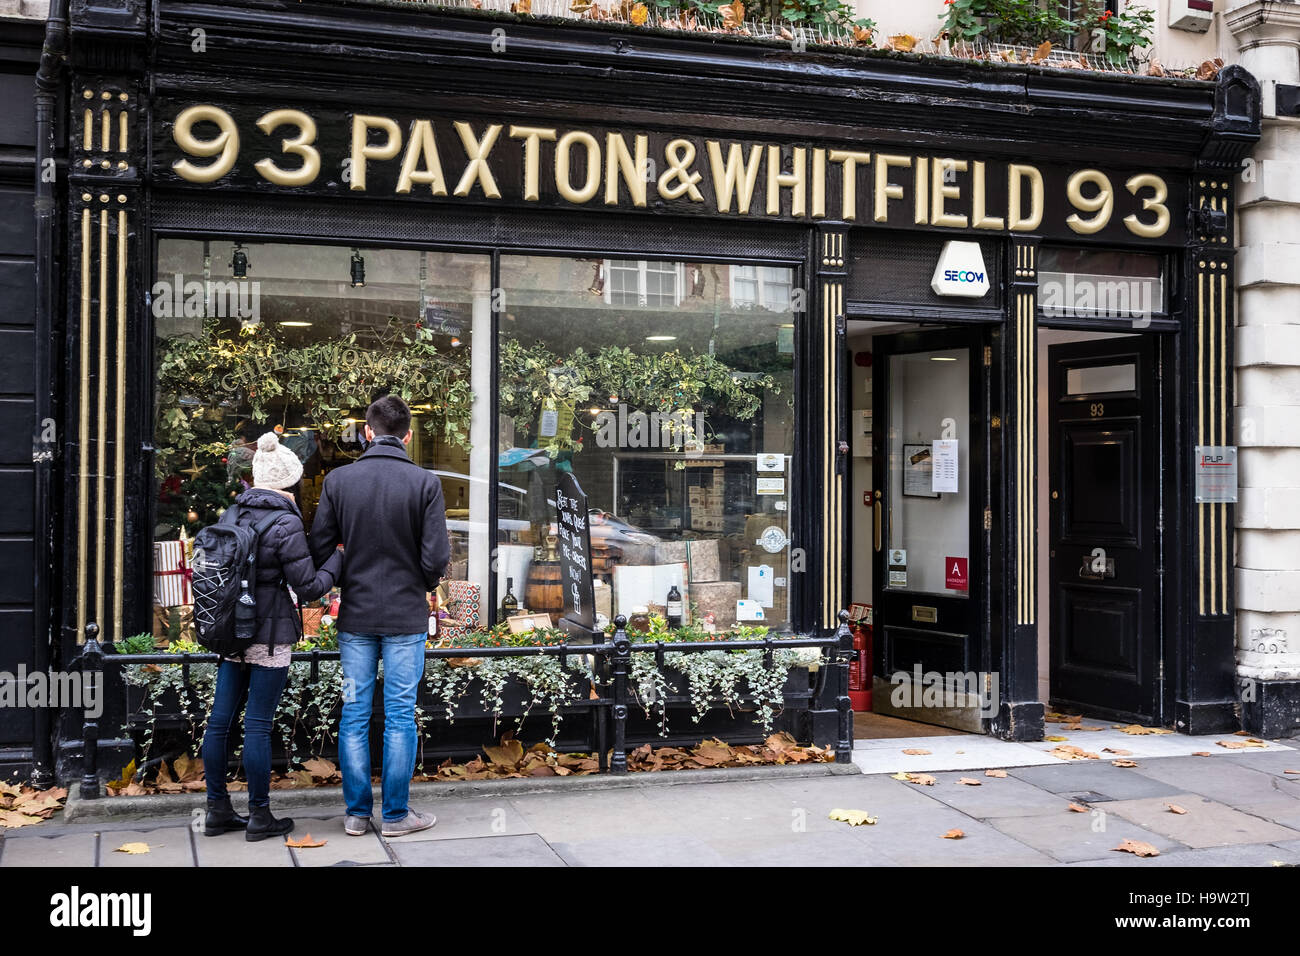 A young couple looking at the window display of Paxton and Whitfield Cheesemongers in Jermyn Street, London. Stock Photo